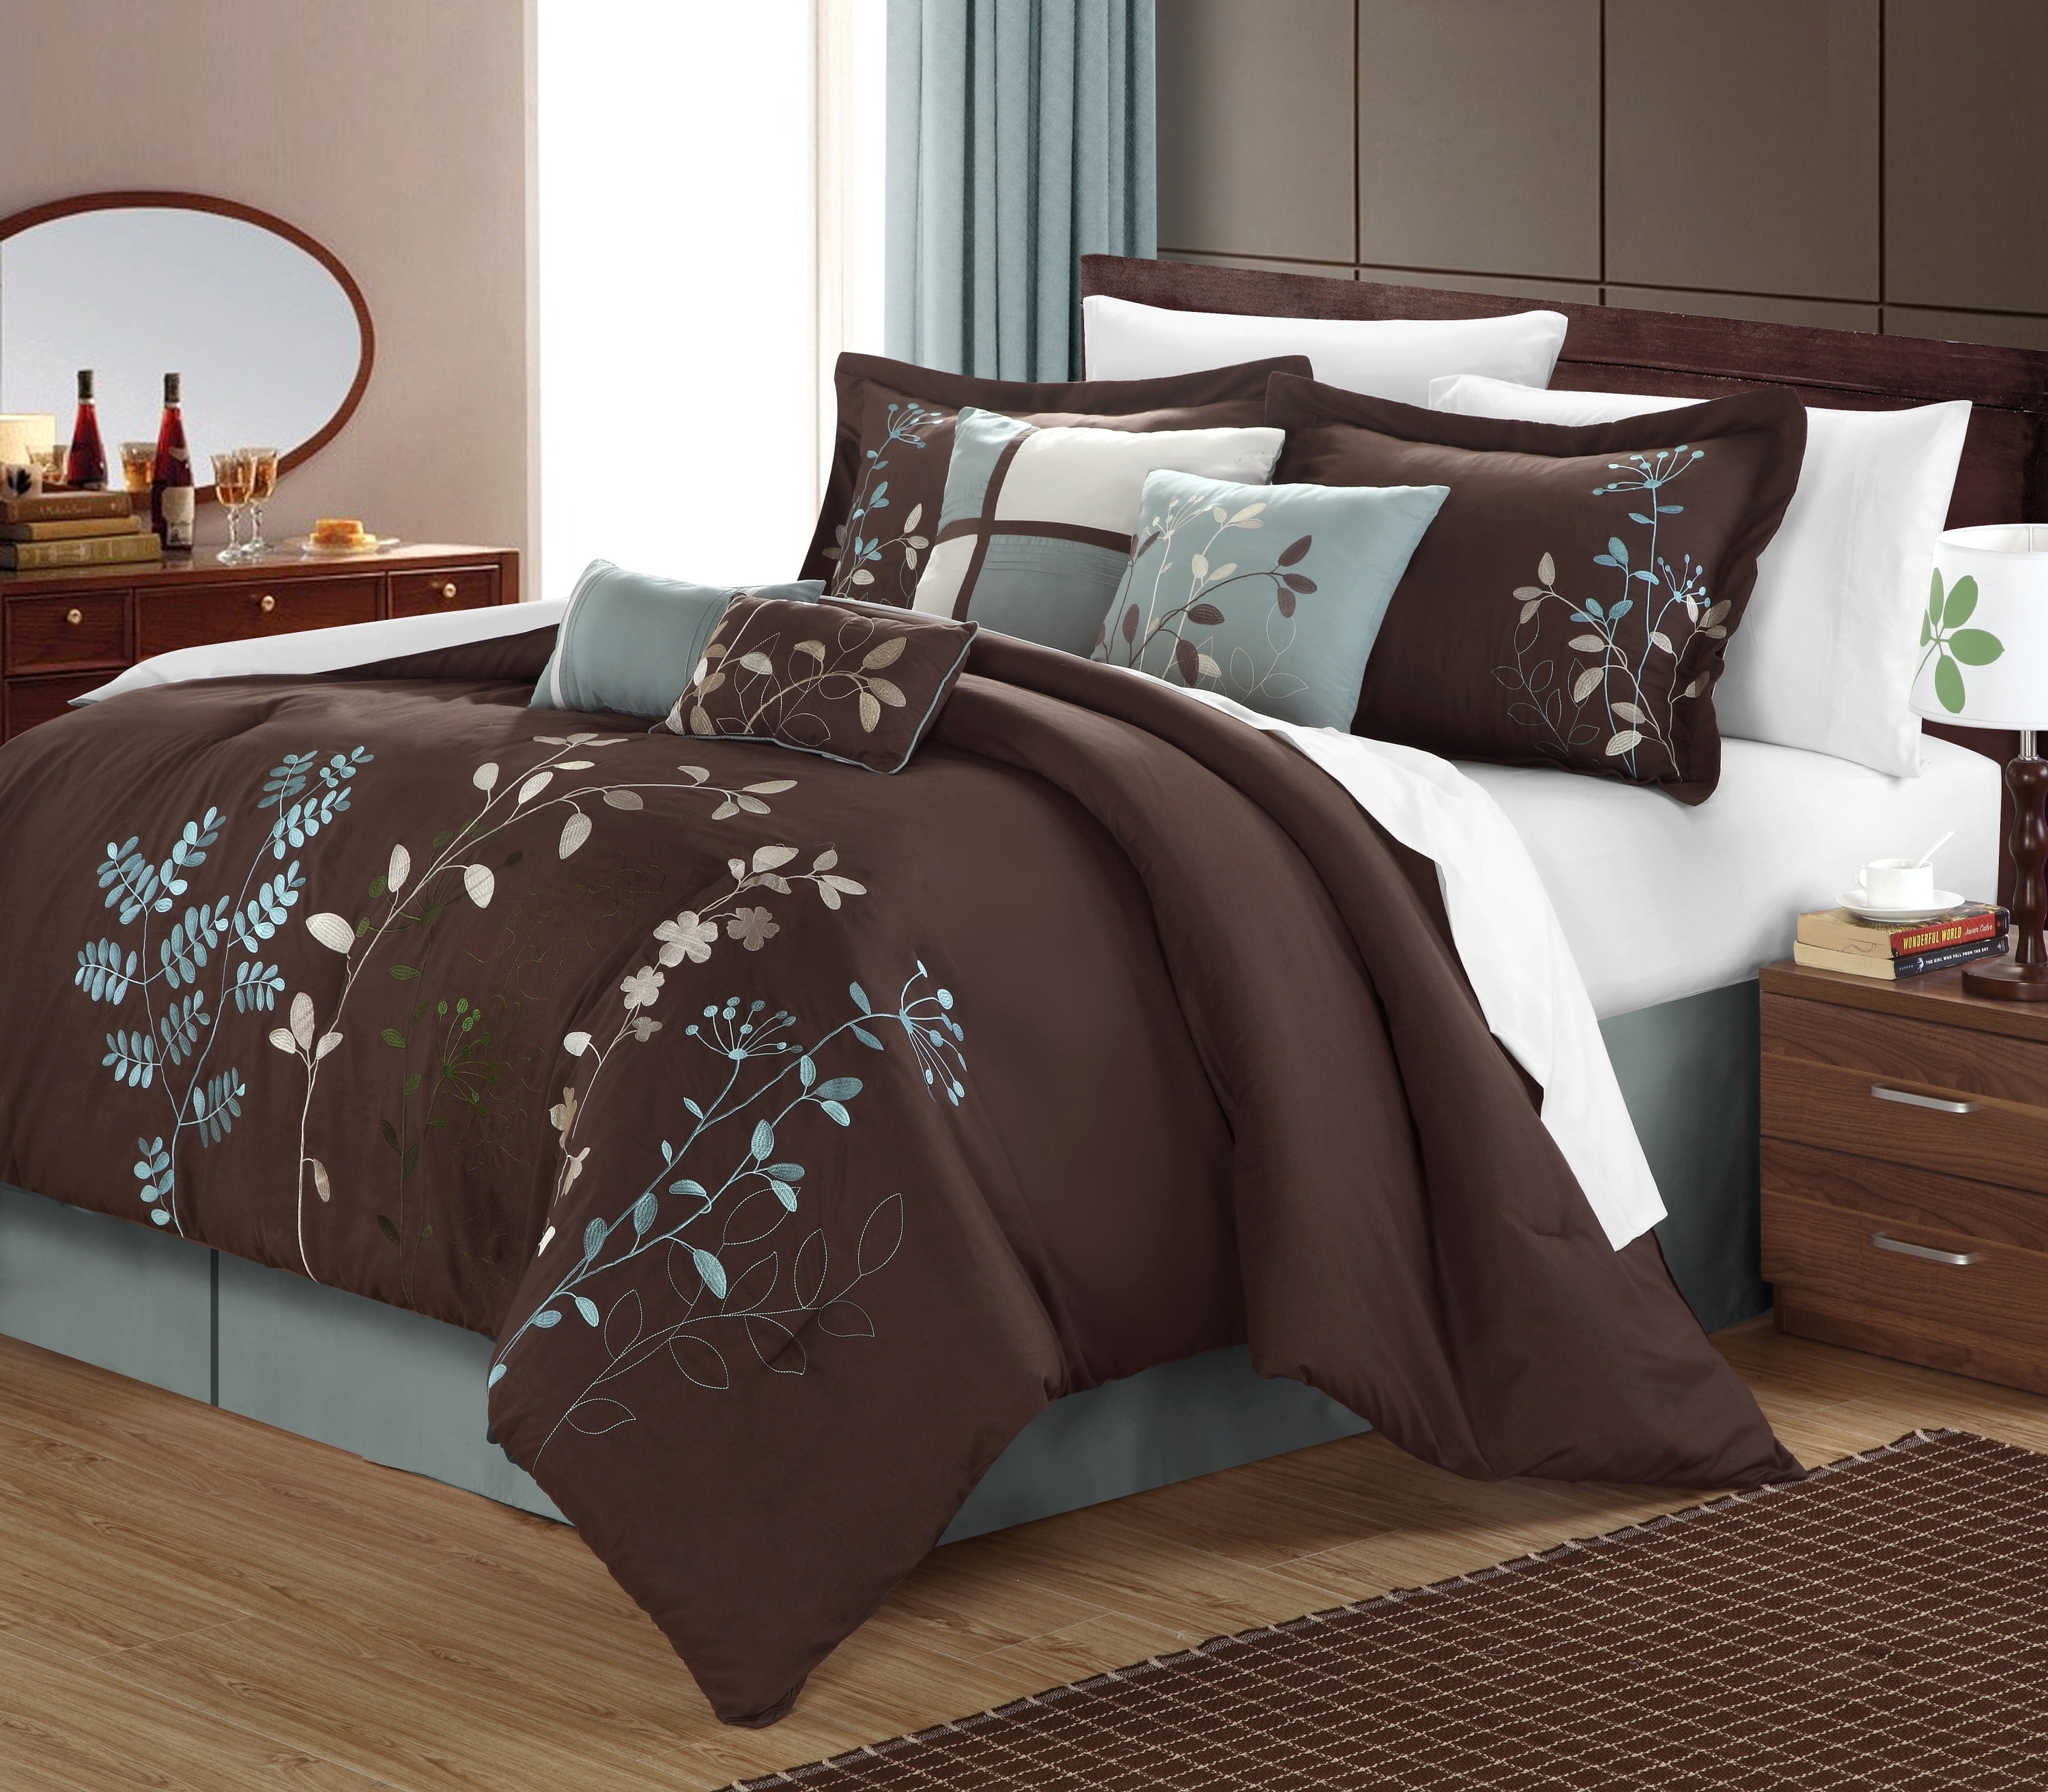 NEW ~ COZY CHIC MODERN  IVORY WHITE RED BROWN TAUPE LEAF VINE COMFORTER SET 